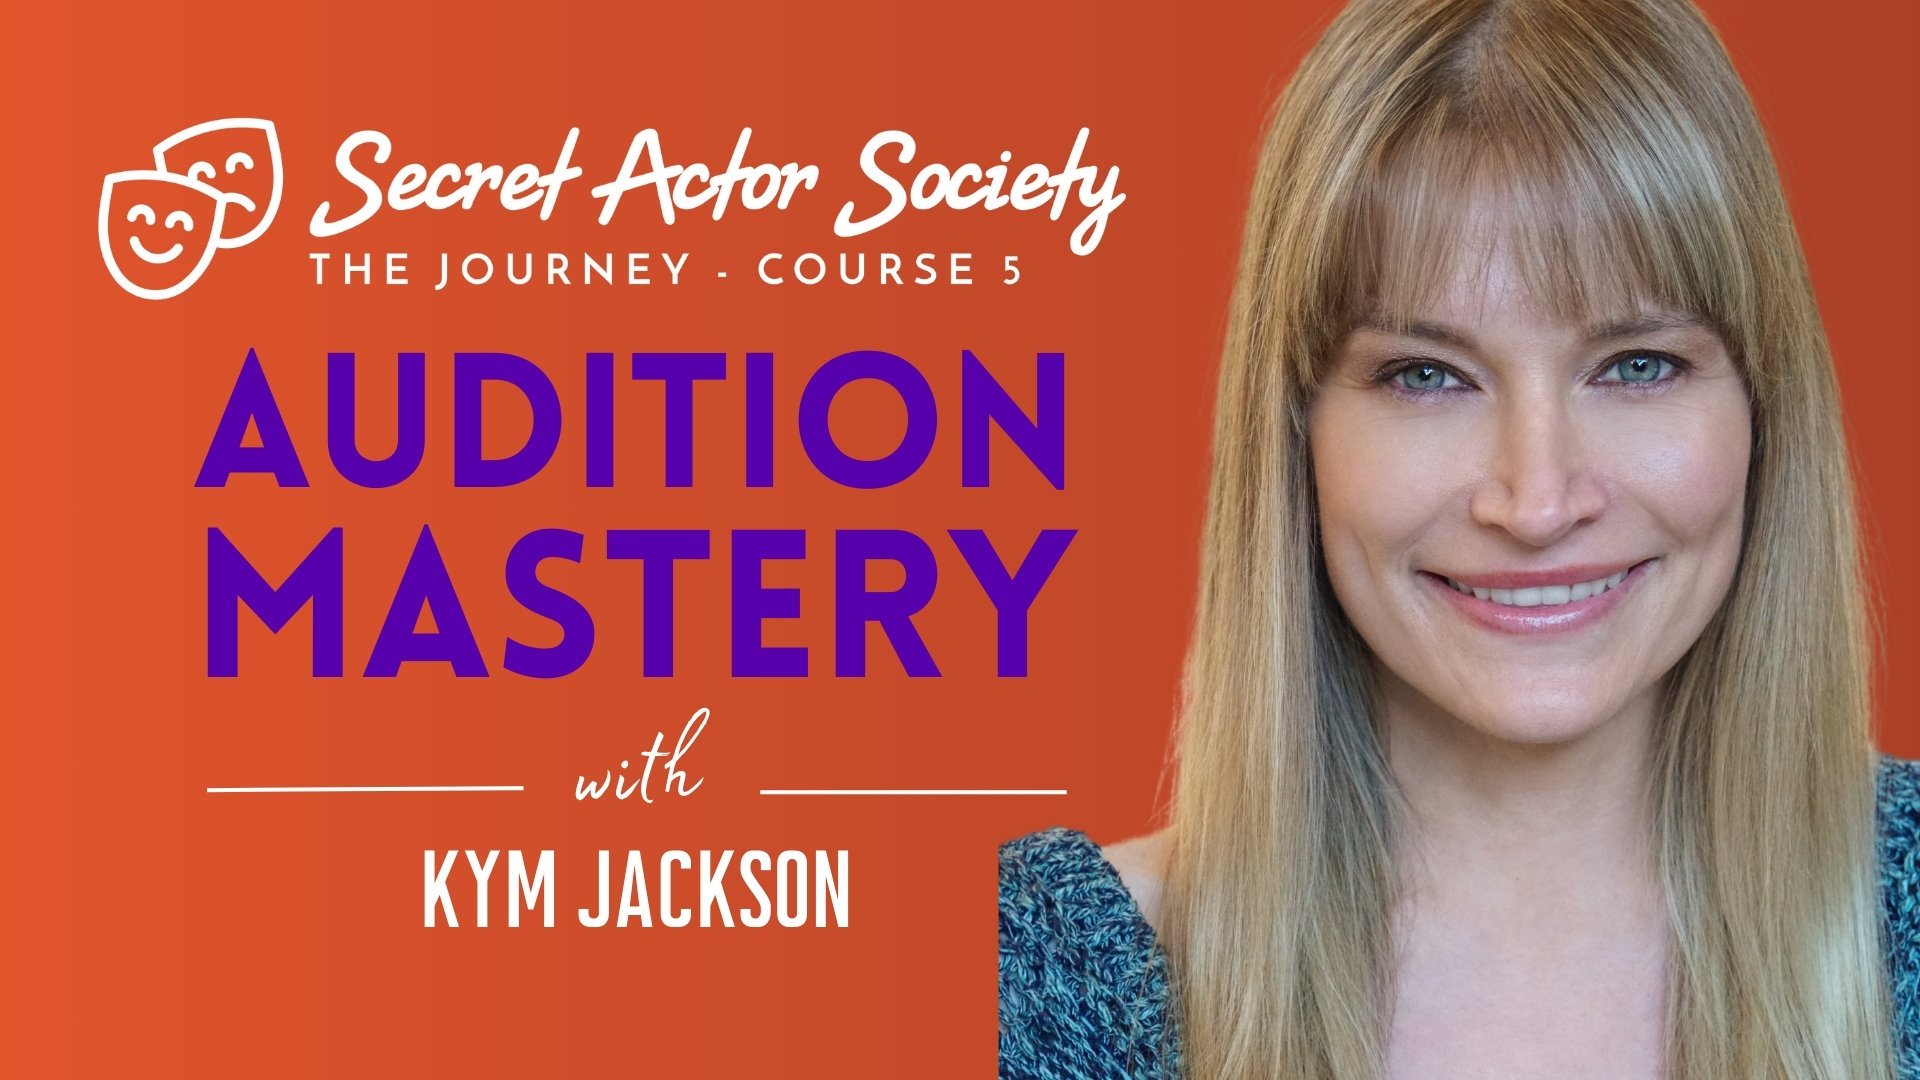 The SAS Journey | Course 5 - Audition Mastery